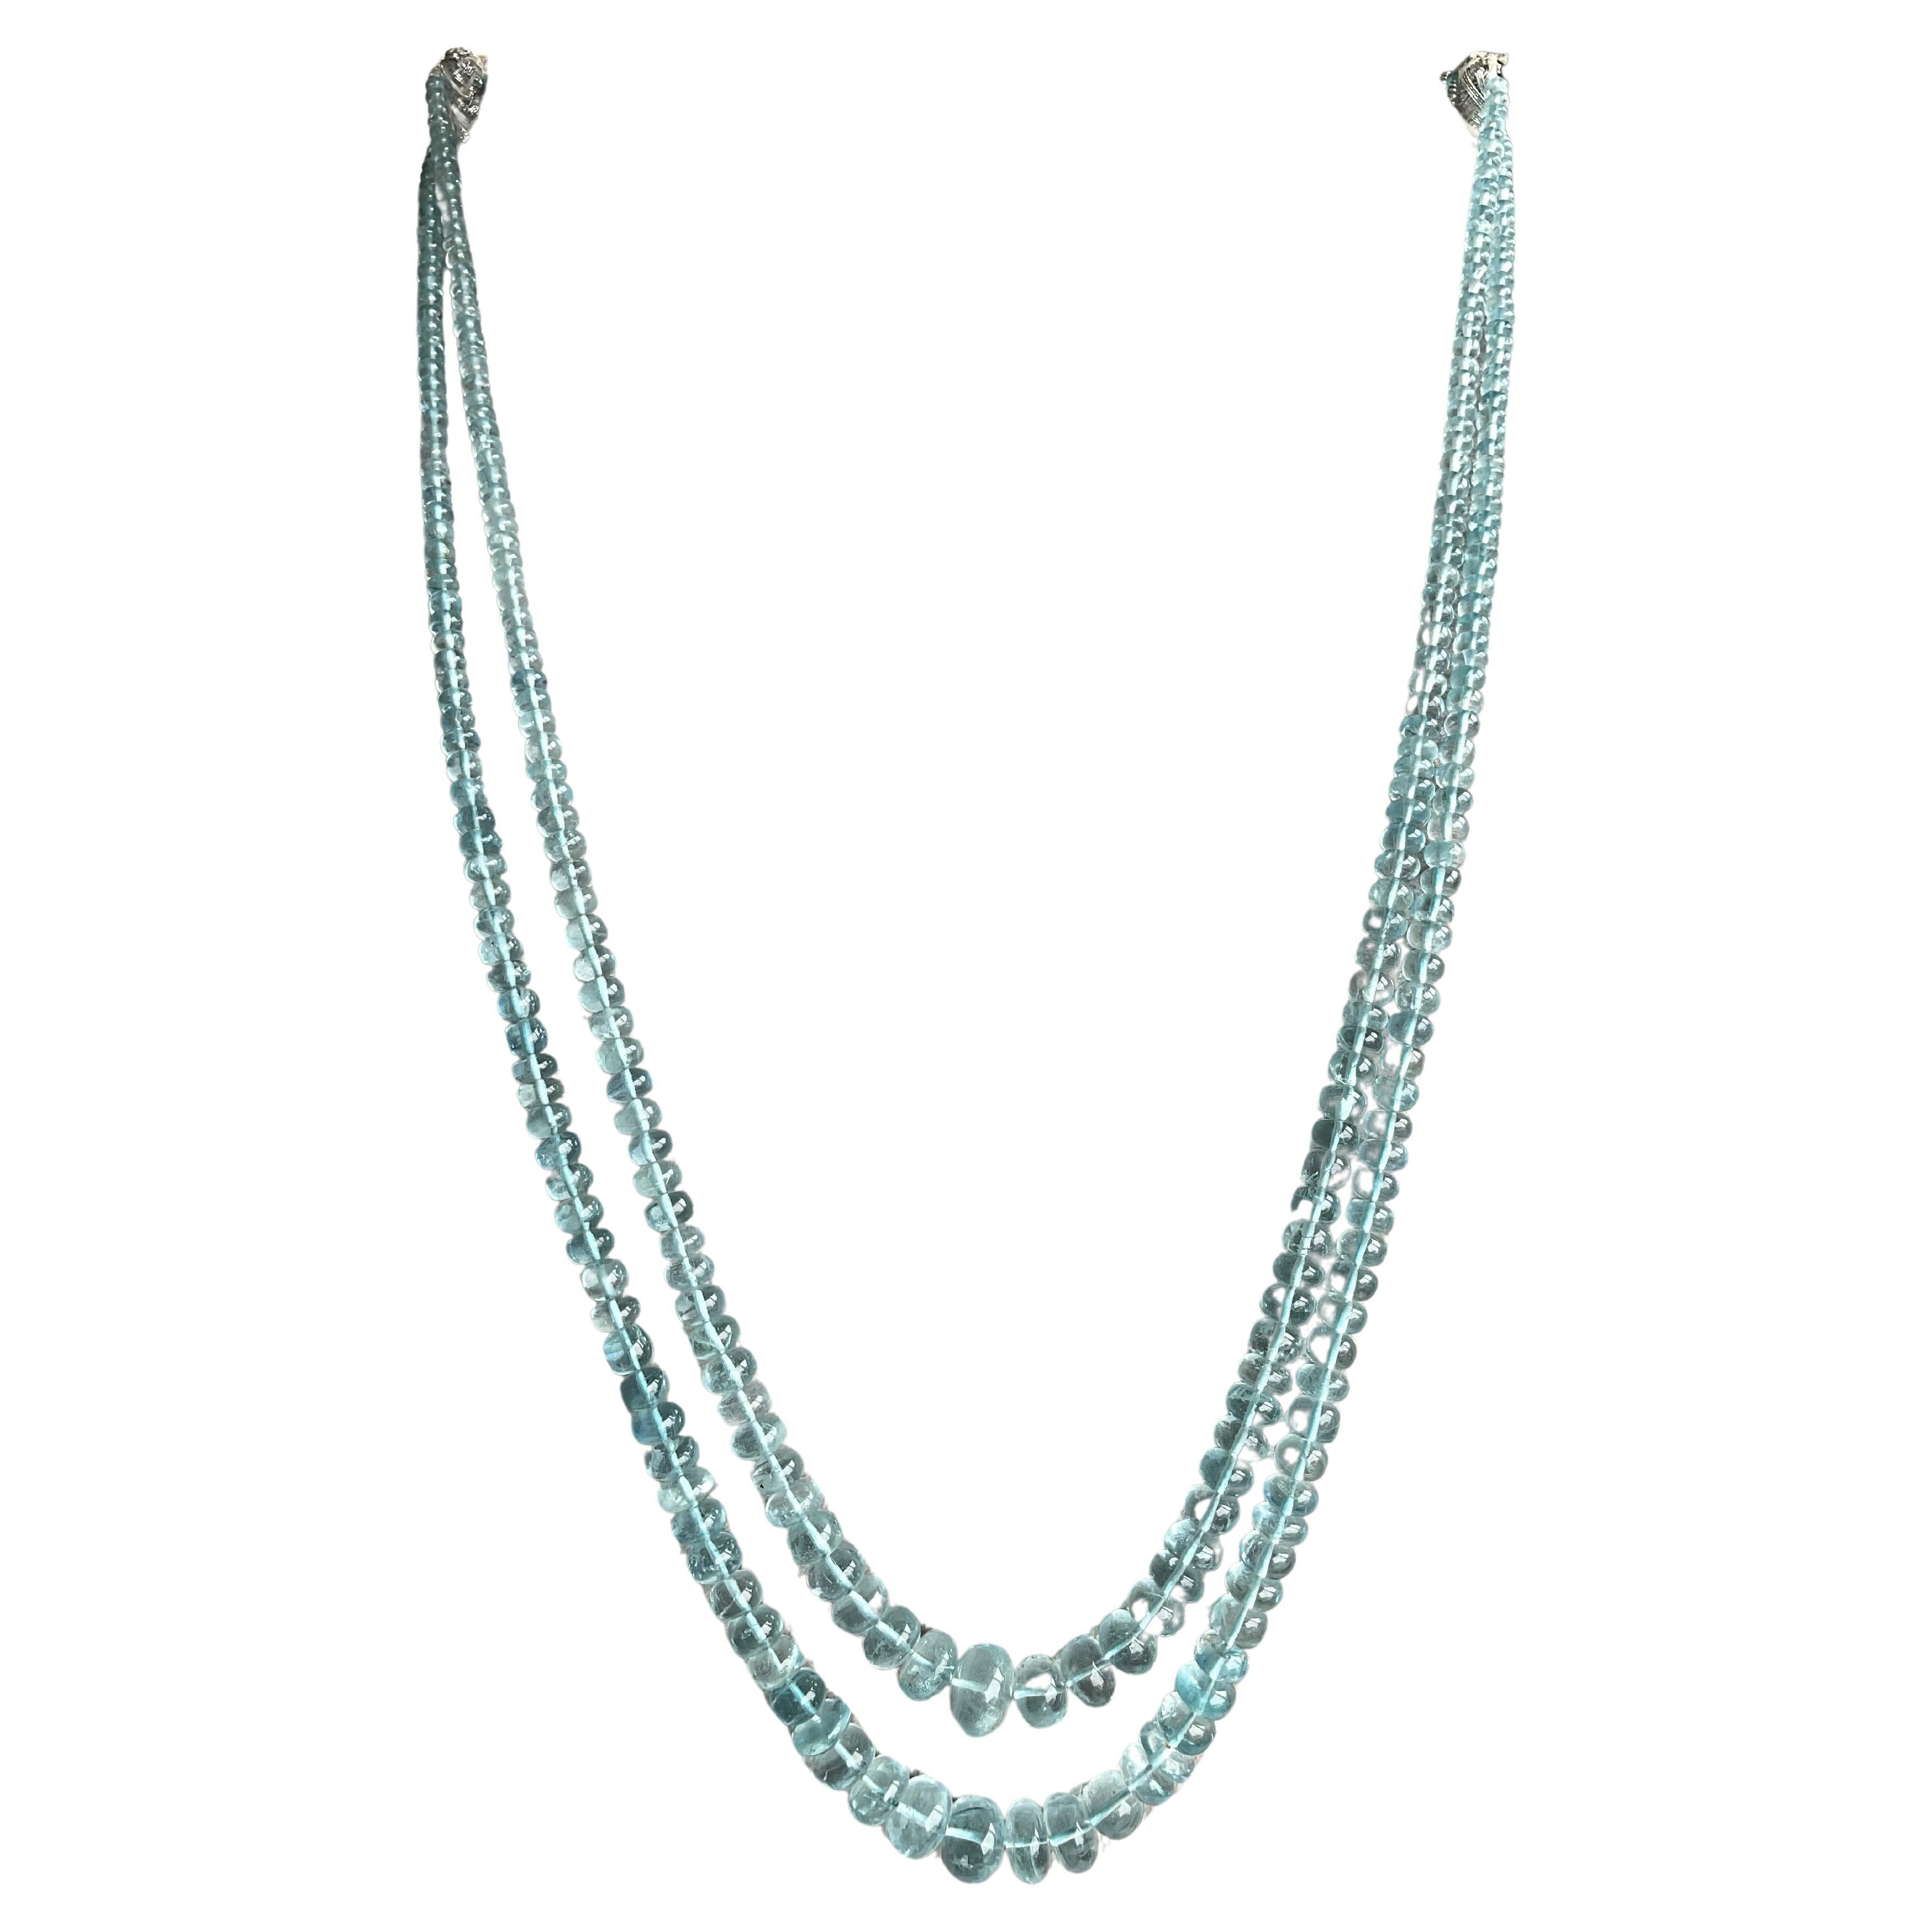 198.75 Carats Aquamarine Necklace Beads 2 Strands Top Quality Natural Gemstones For Sale